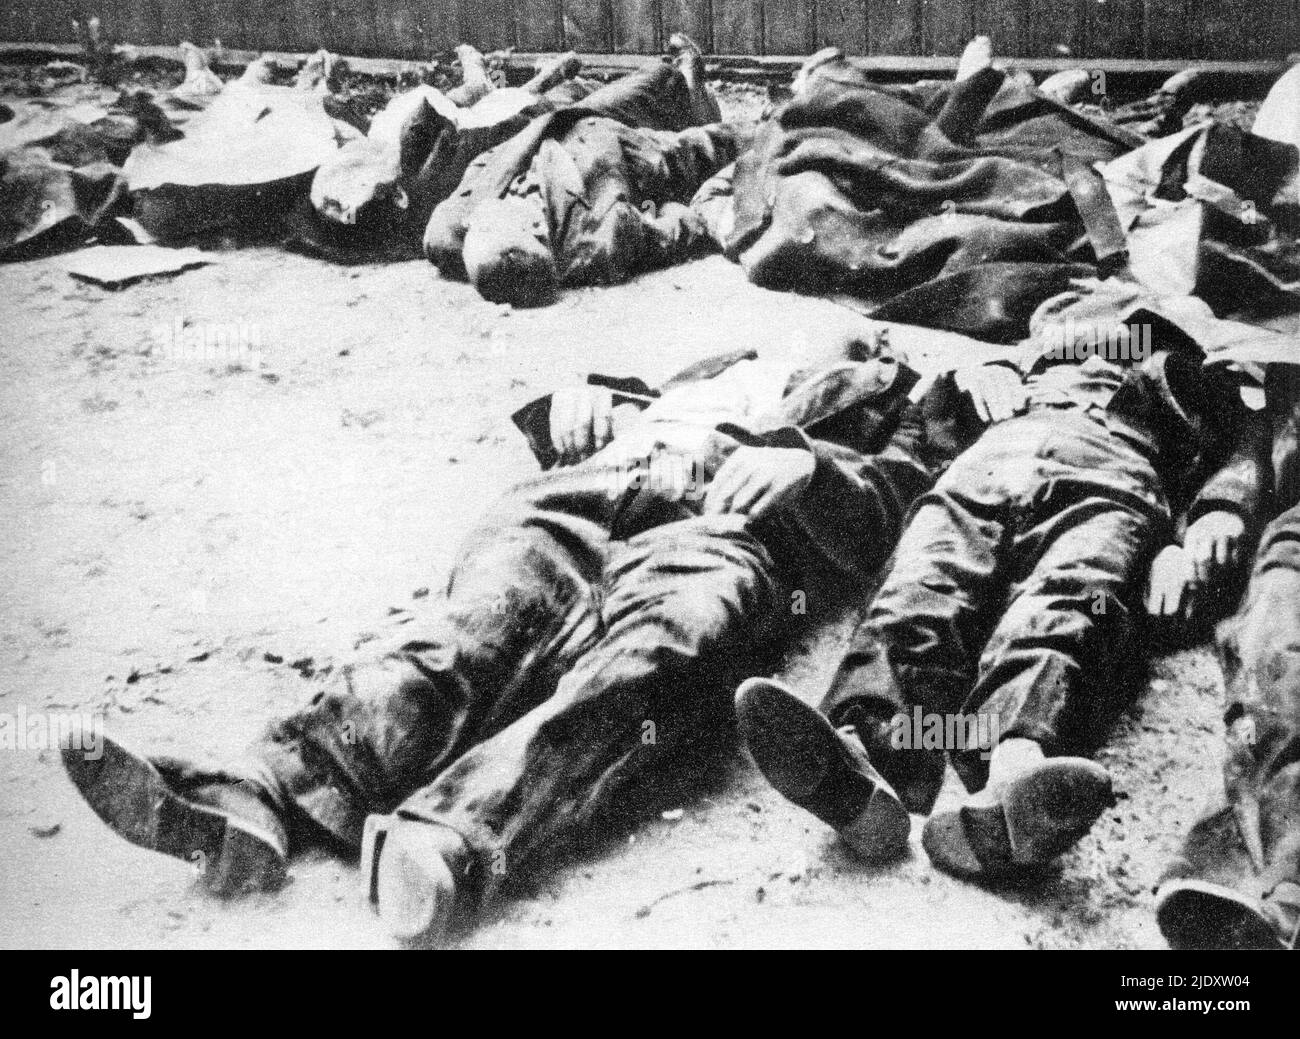 Polish civilians murdered in the Wola massacre by the Dirlewanger Brigade, Warsaw, August 1944. This unit of the SS was led by Oskar Dirlewanger and was composed of convicted criminals. Even among the SS he was considered as particularly barbaric. The brigade assisted in the execuion of around 100,000 Polish residents of Warsaw, most notably in the appalling violence inflicted in the Wola Massacre. Stock Photo